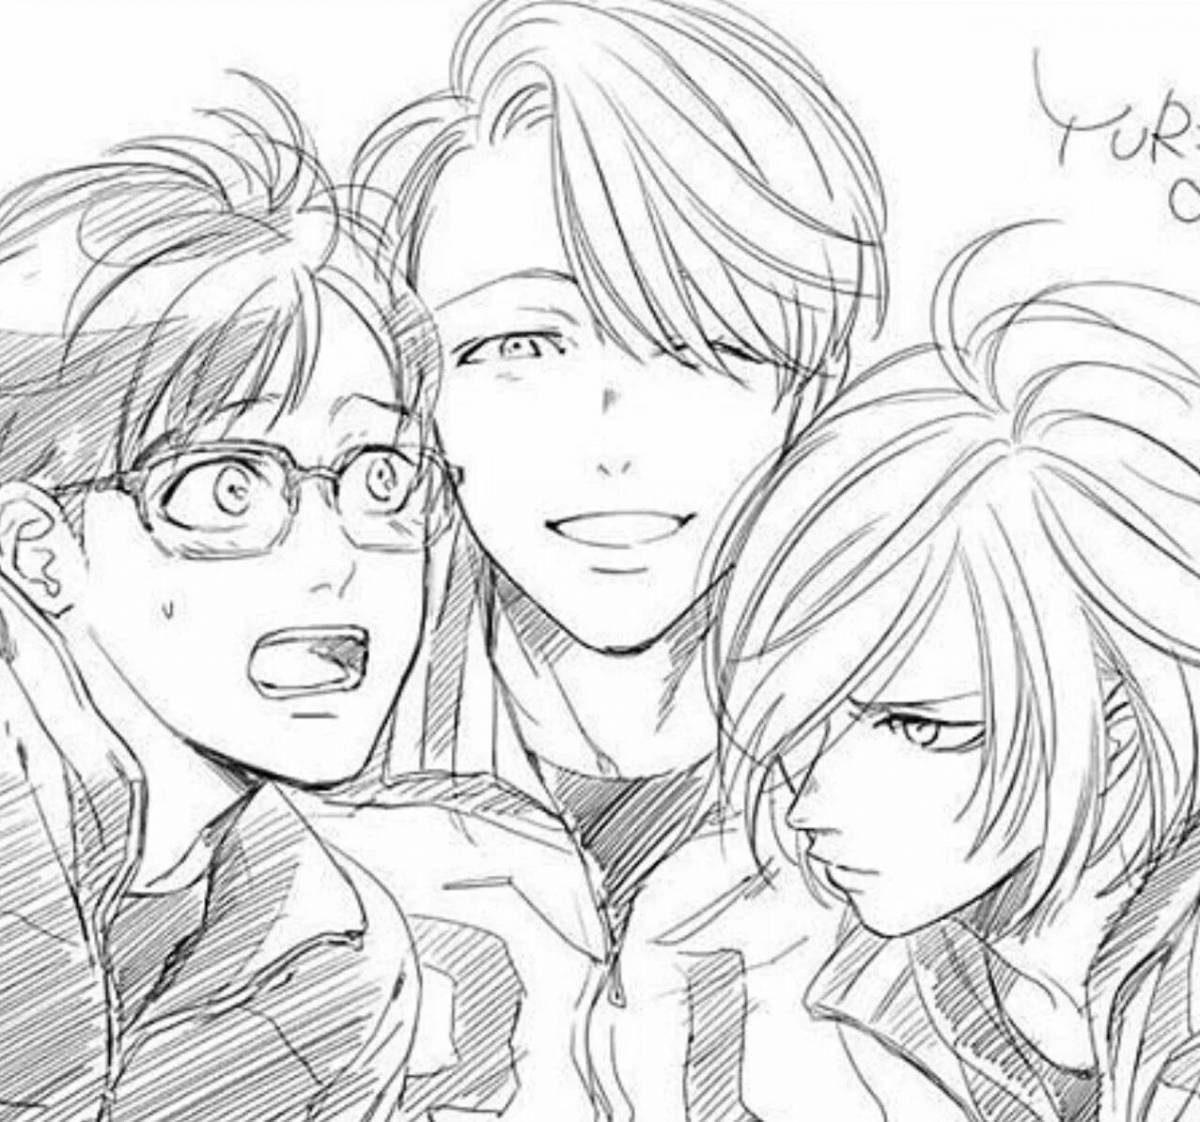 Exquisite yuri on ice coloring book